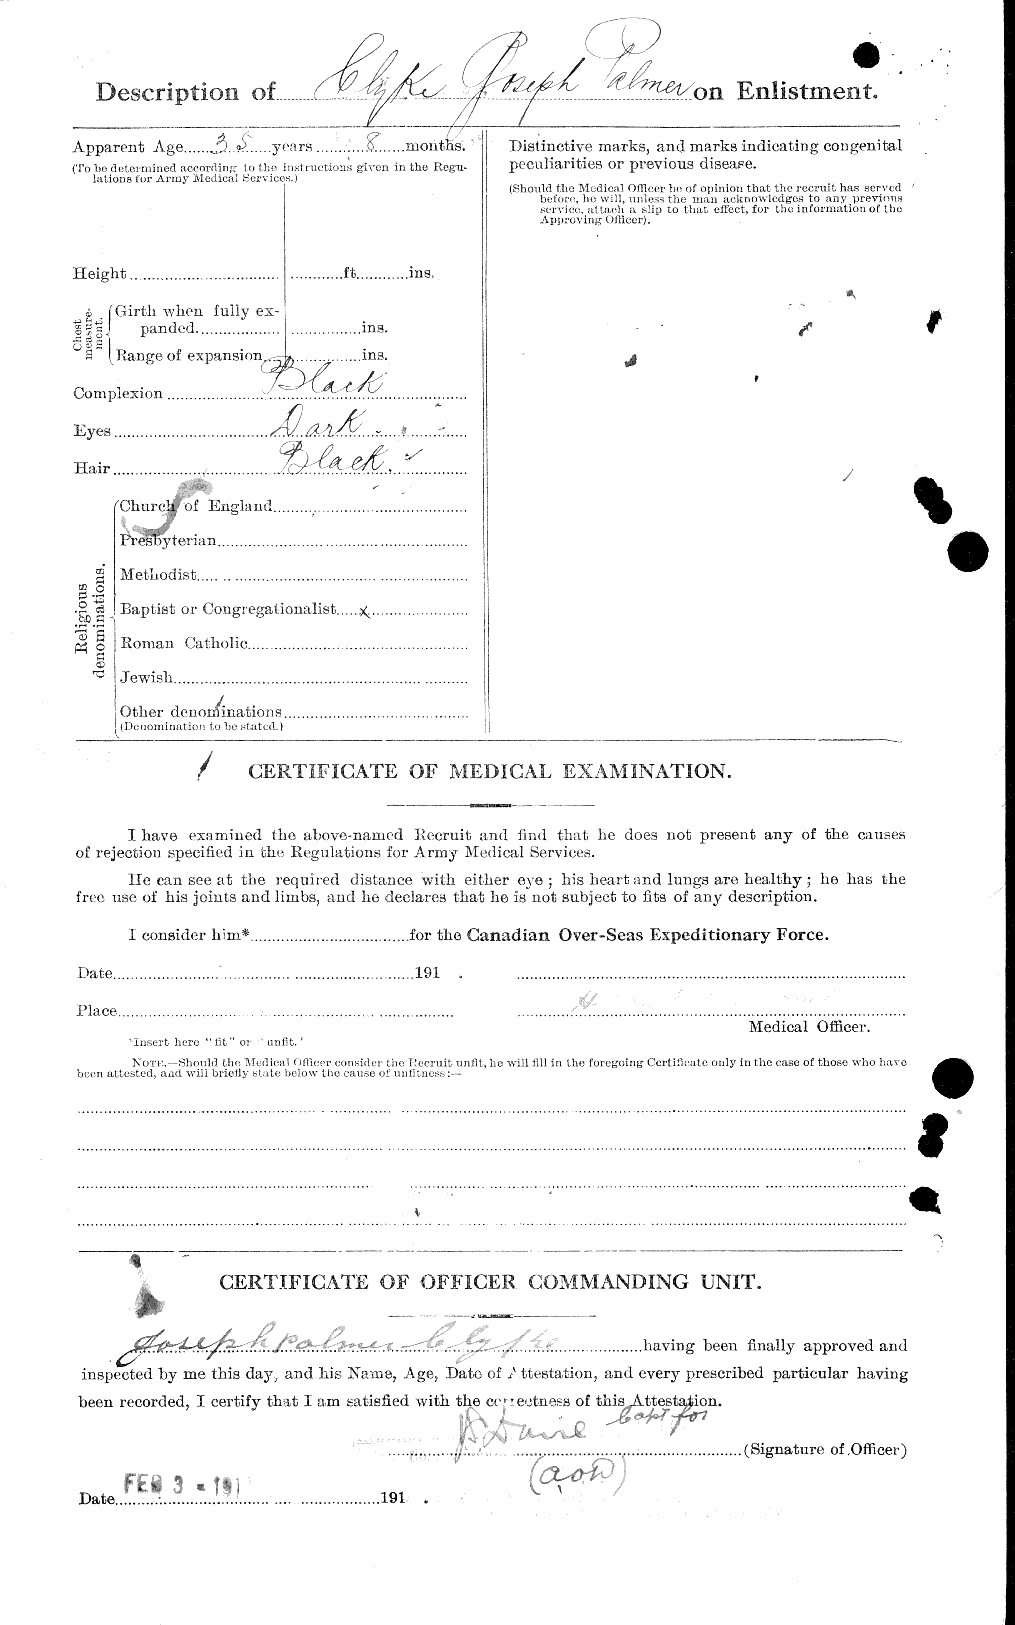 Personnel Records of the First World War - CEF 026324b